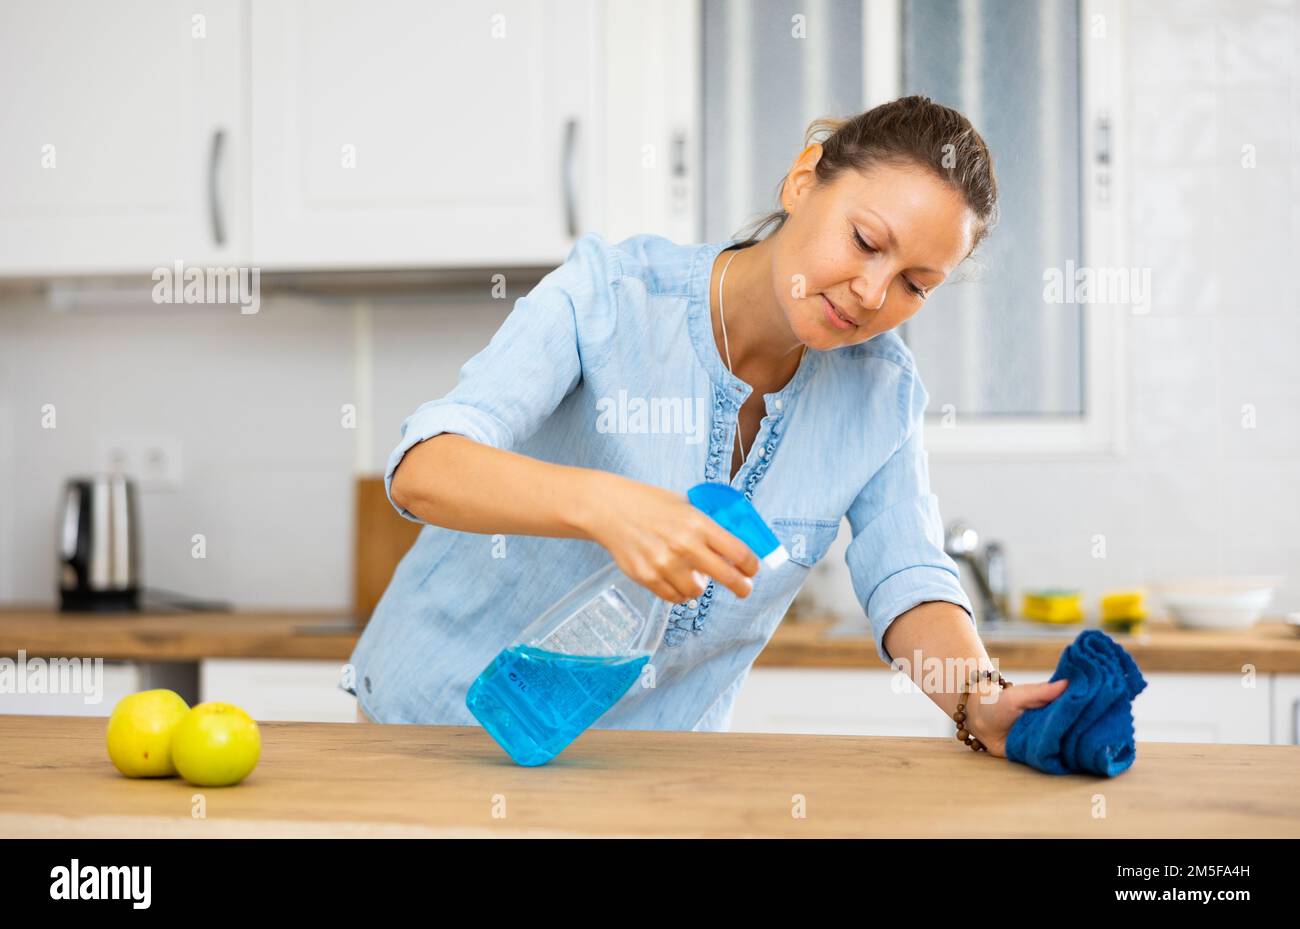 Premium Photo  Smiling beautiful lady standing behind a modern kitchen  desk, dressed-up for housecleaning with detergents and rugs in front of her.